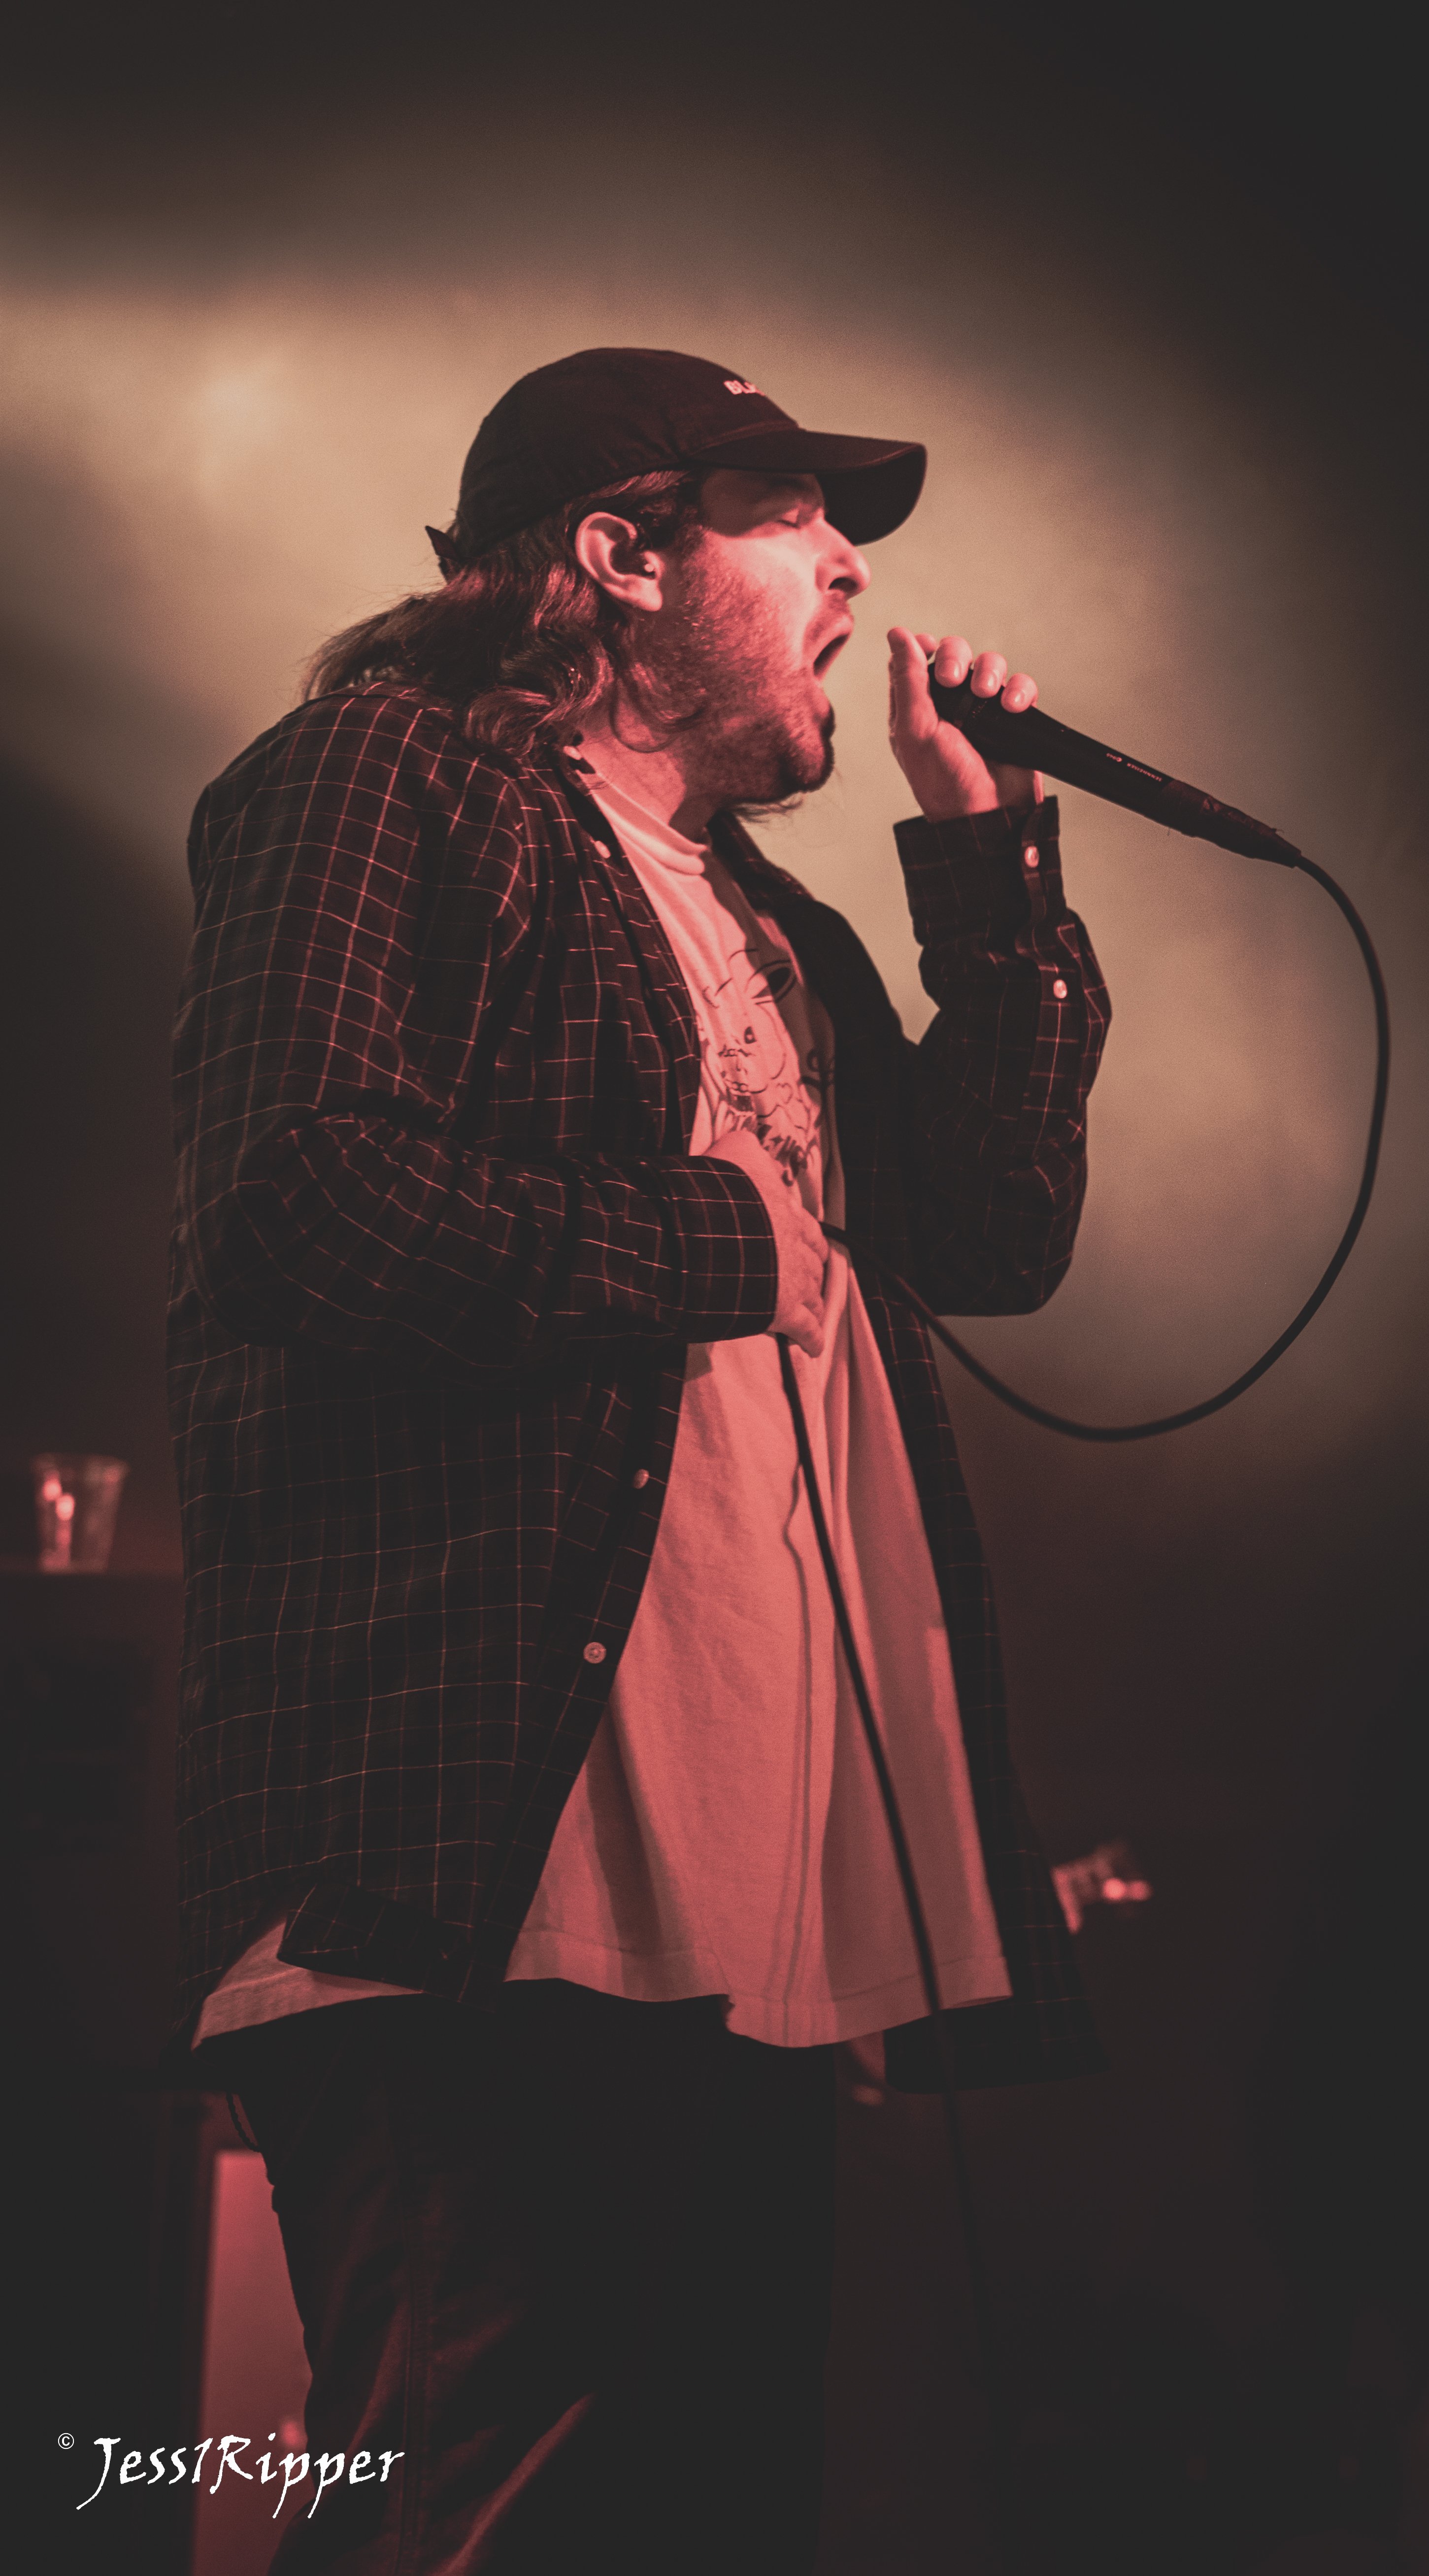 Photos: The Devil Wears Prada, Fit For A King, Counterparts, and Avoid at Starland Ballroom in Sayreville, New Jersey on January 28, 2024